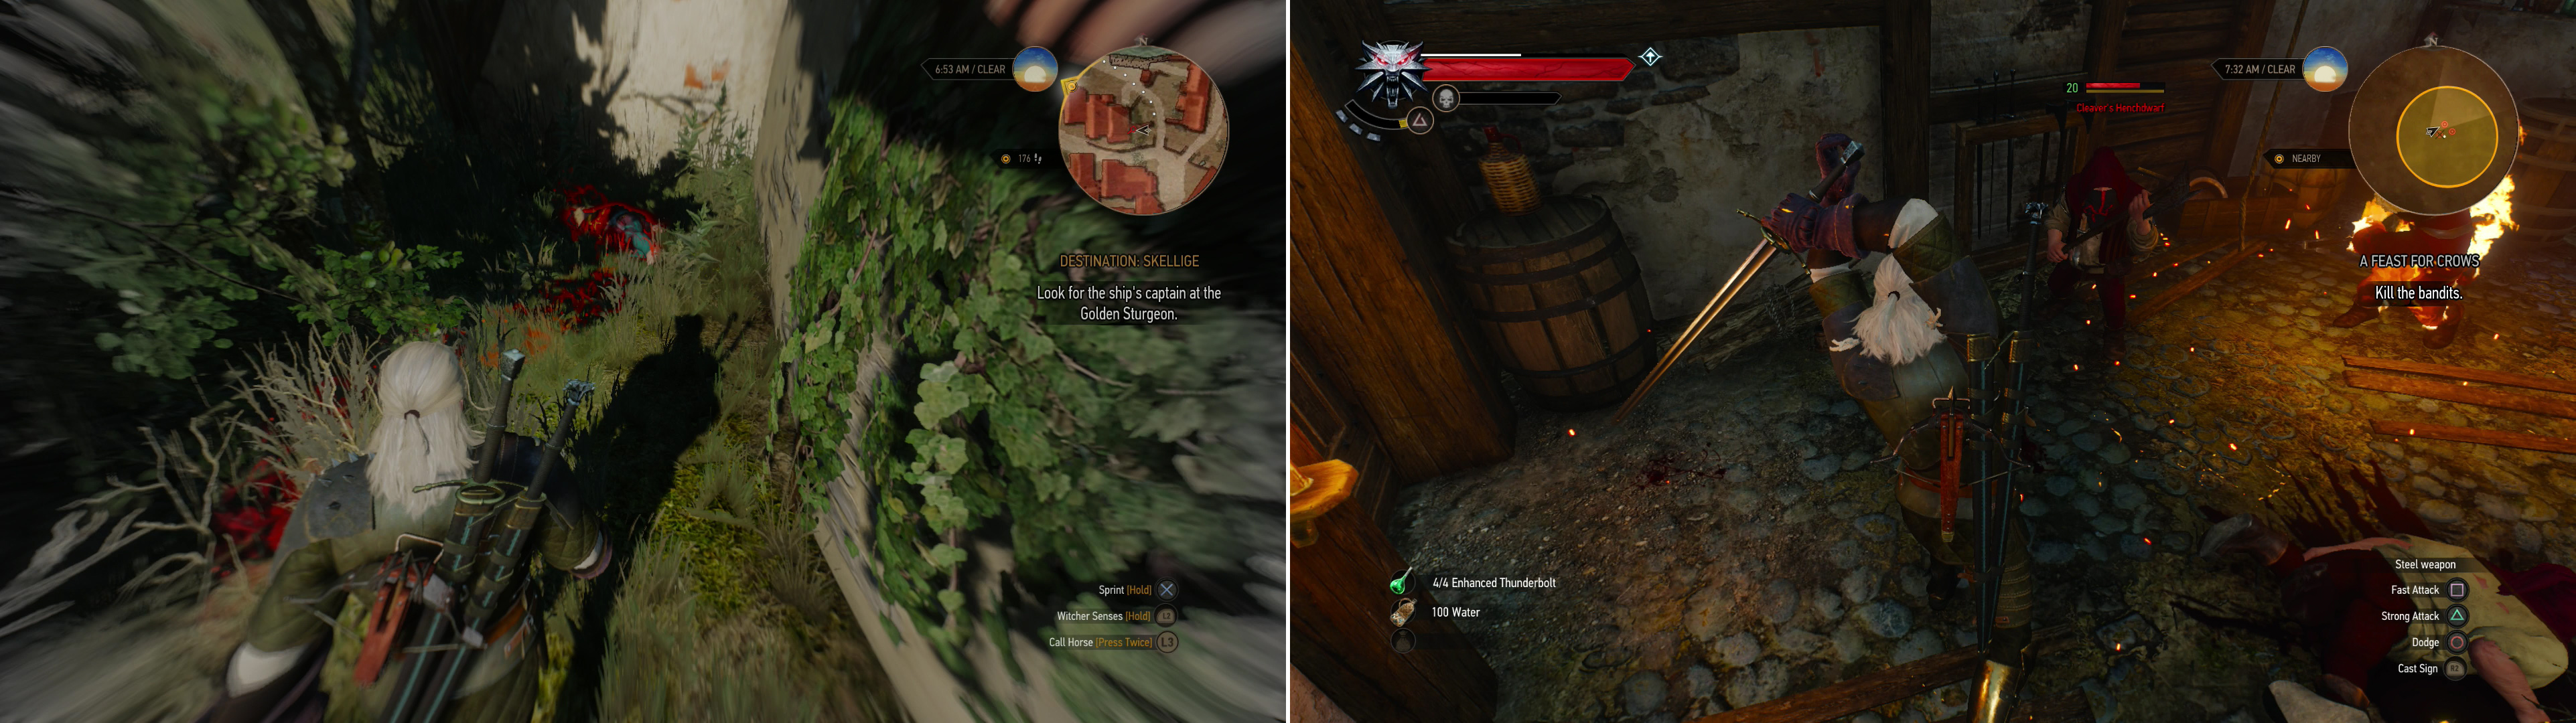 Follow a scent trail to discover a corpse (left). You can either sell the key you found on the corpse to the Dwarves, or kill them and keep the treasure for yourself (right).